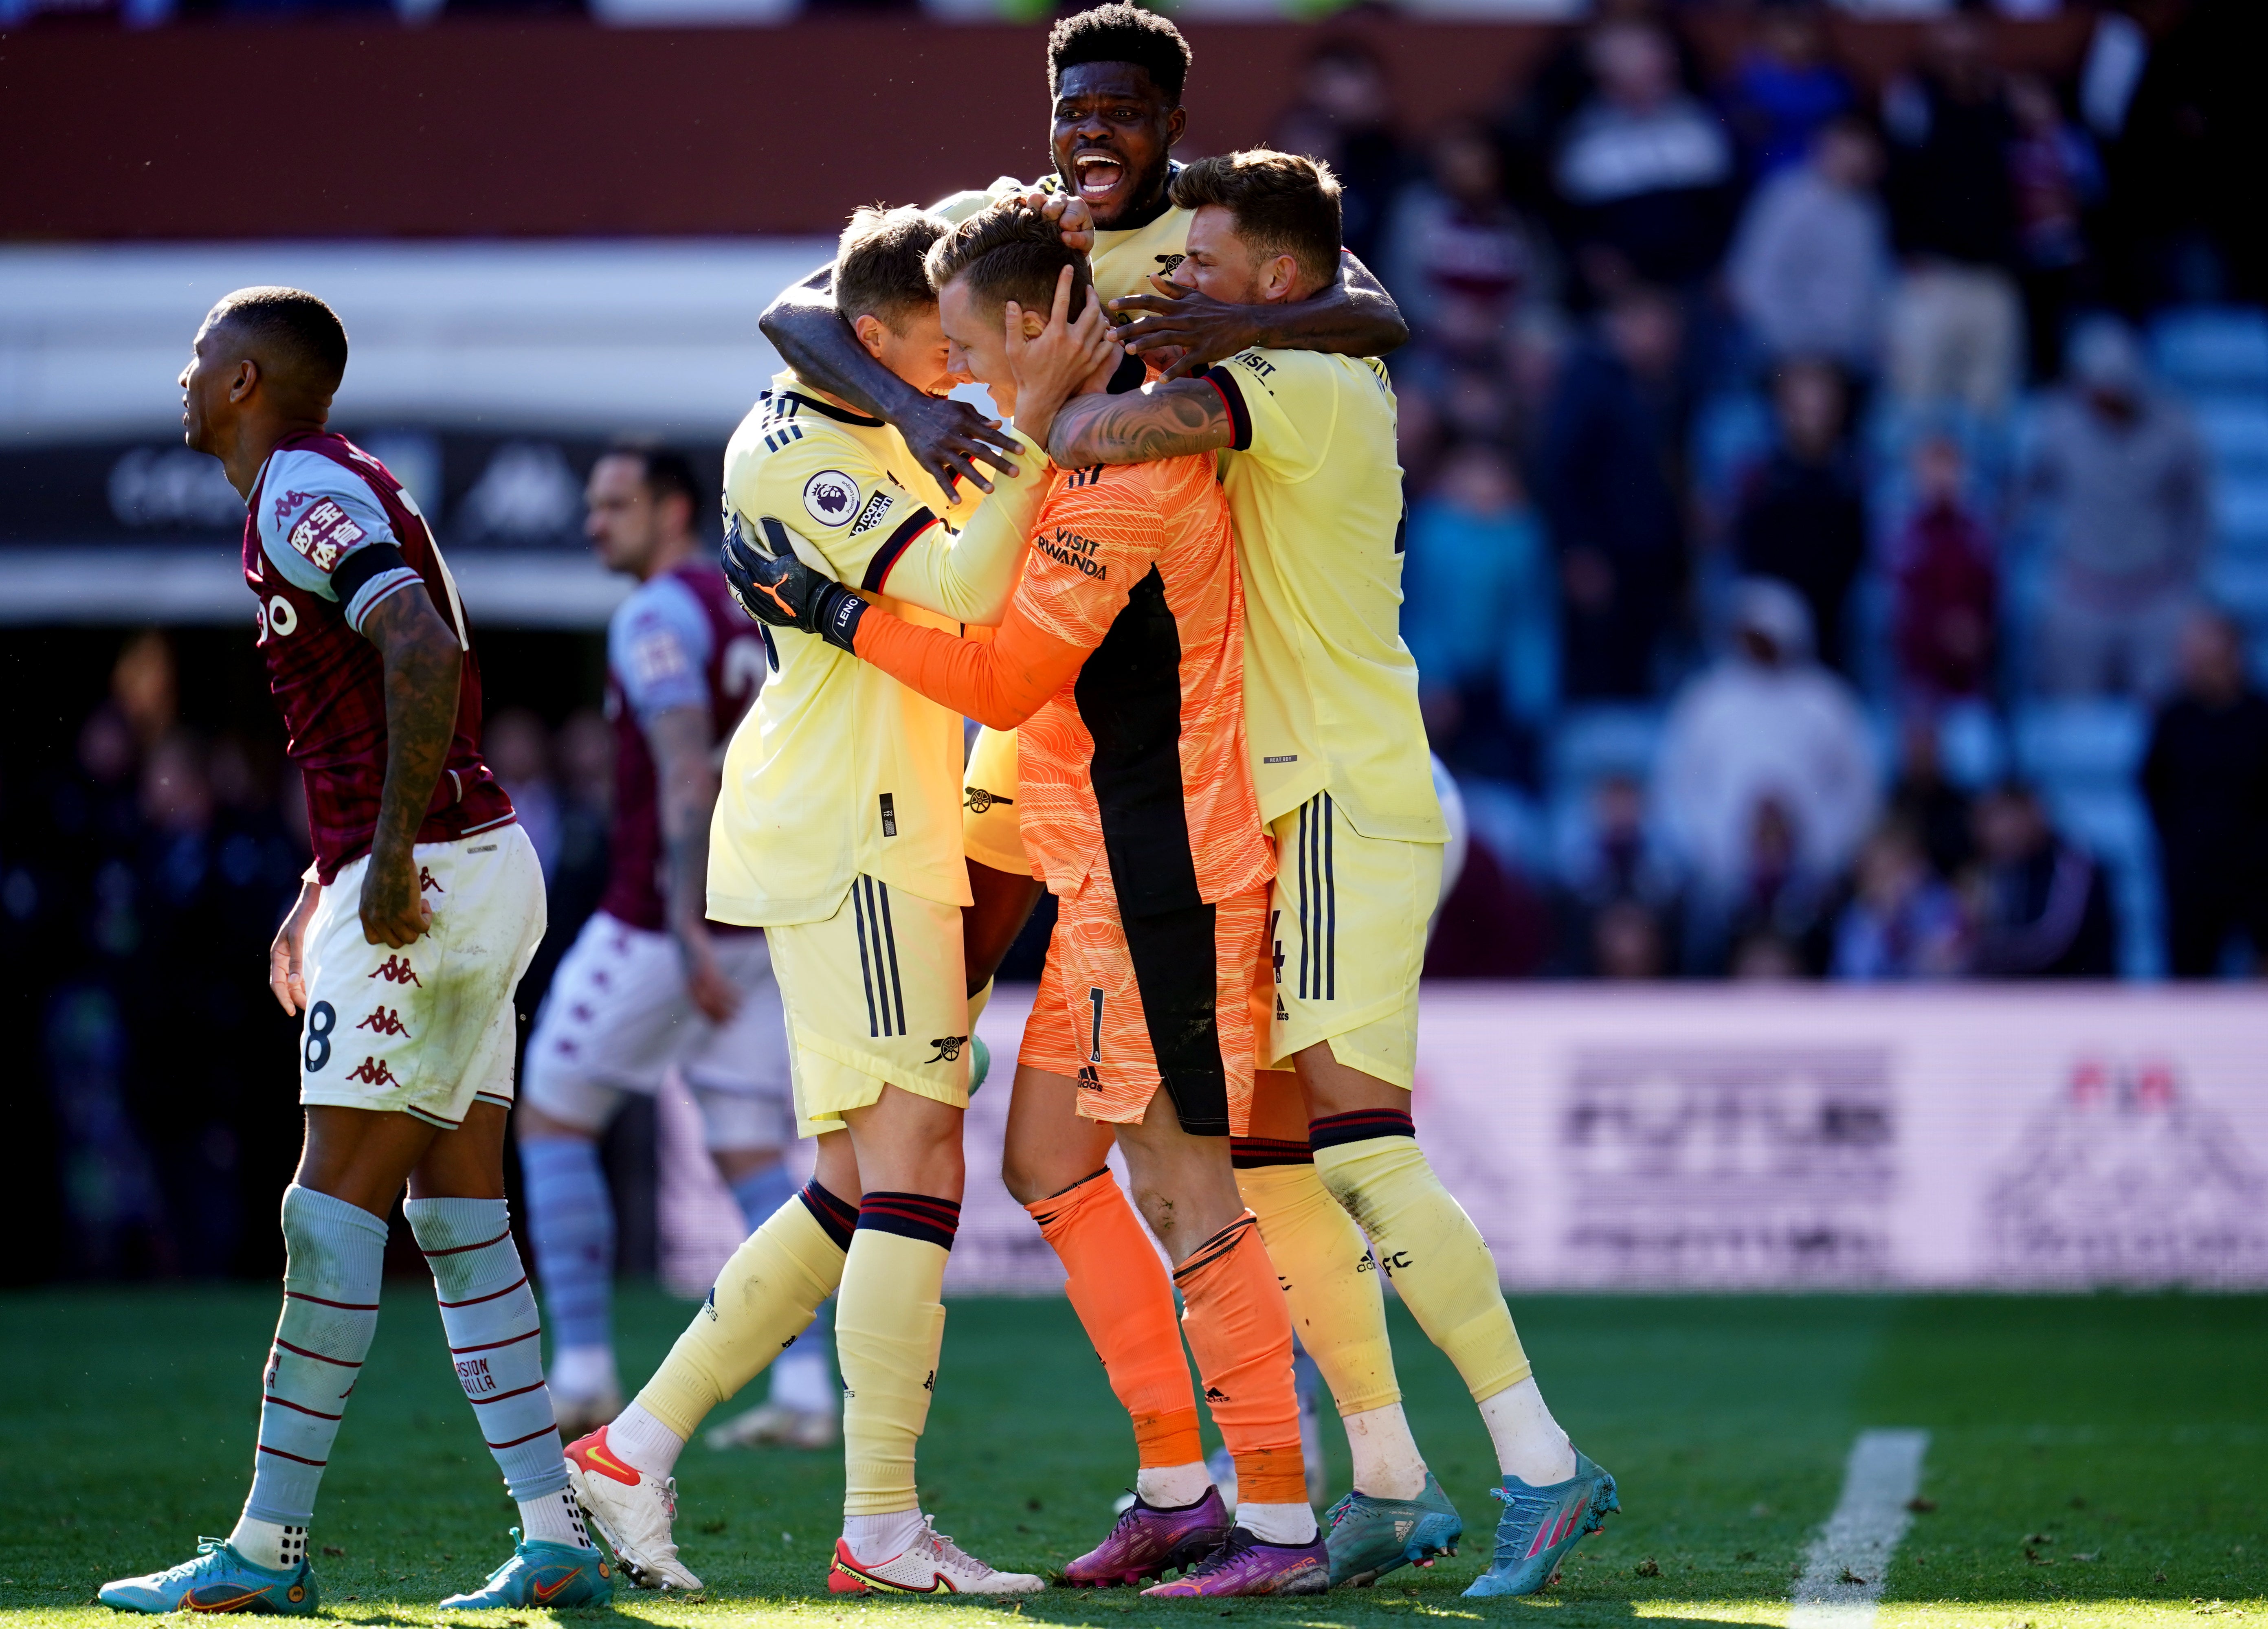 Arsenal goalkeeper Bernd Leno celebrates with Thomas Partey, Ben White, right, and Rob Holding, left, after making a save in the closing stages against Aston Villa (Nick Potts/PA)